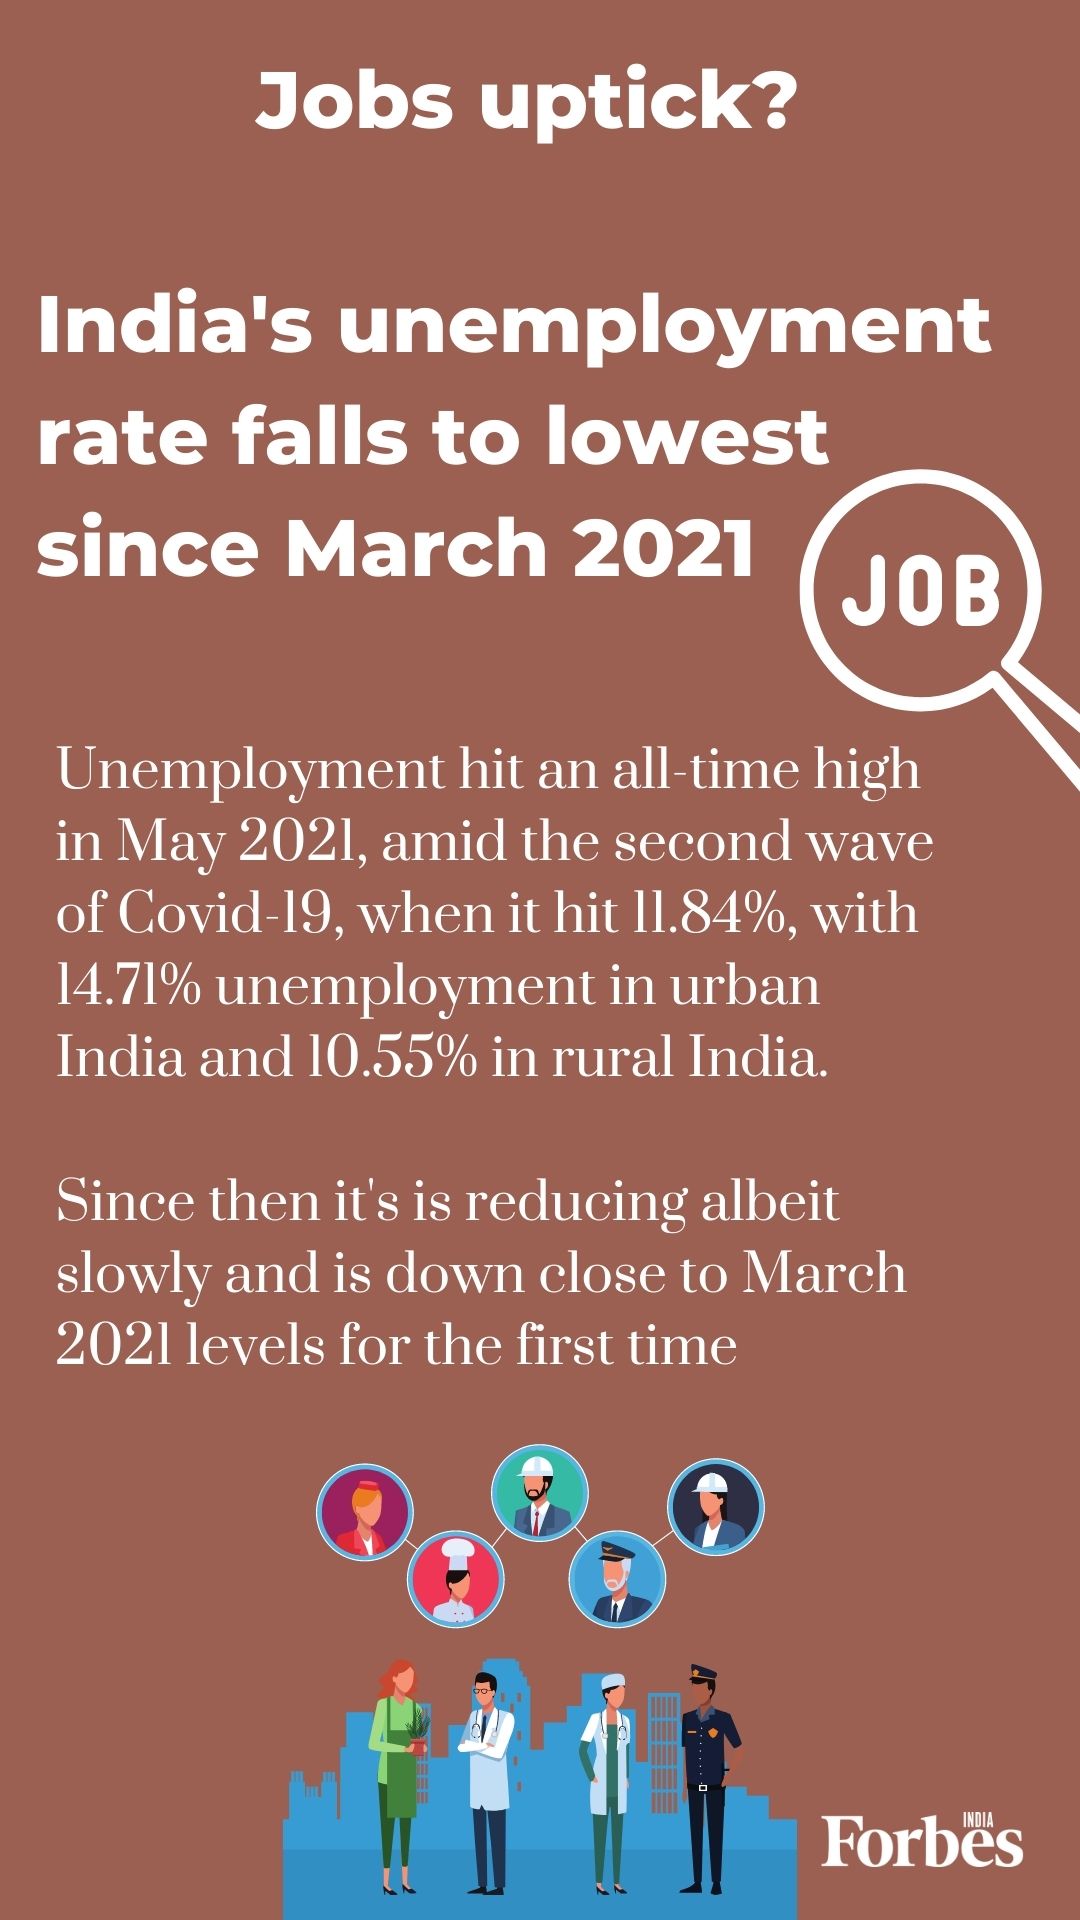 India's unemployment rate falls to lowest since March 2021